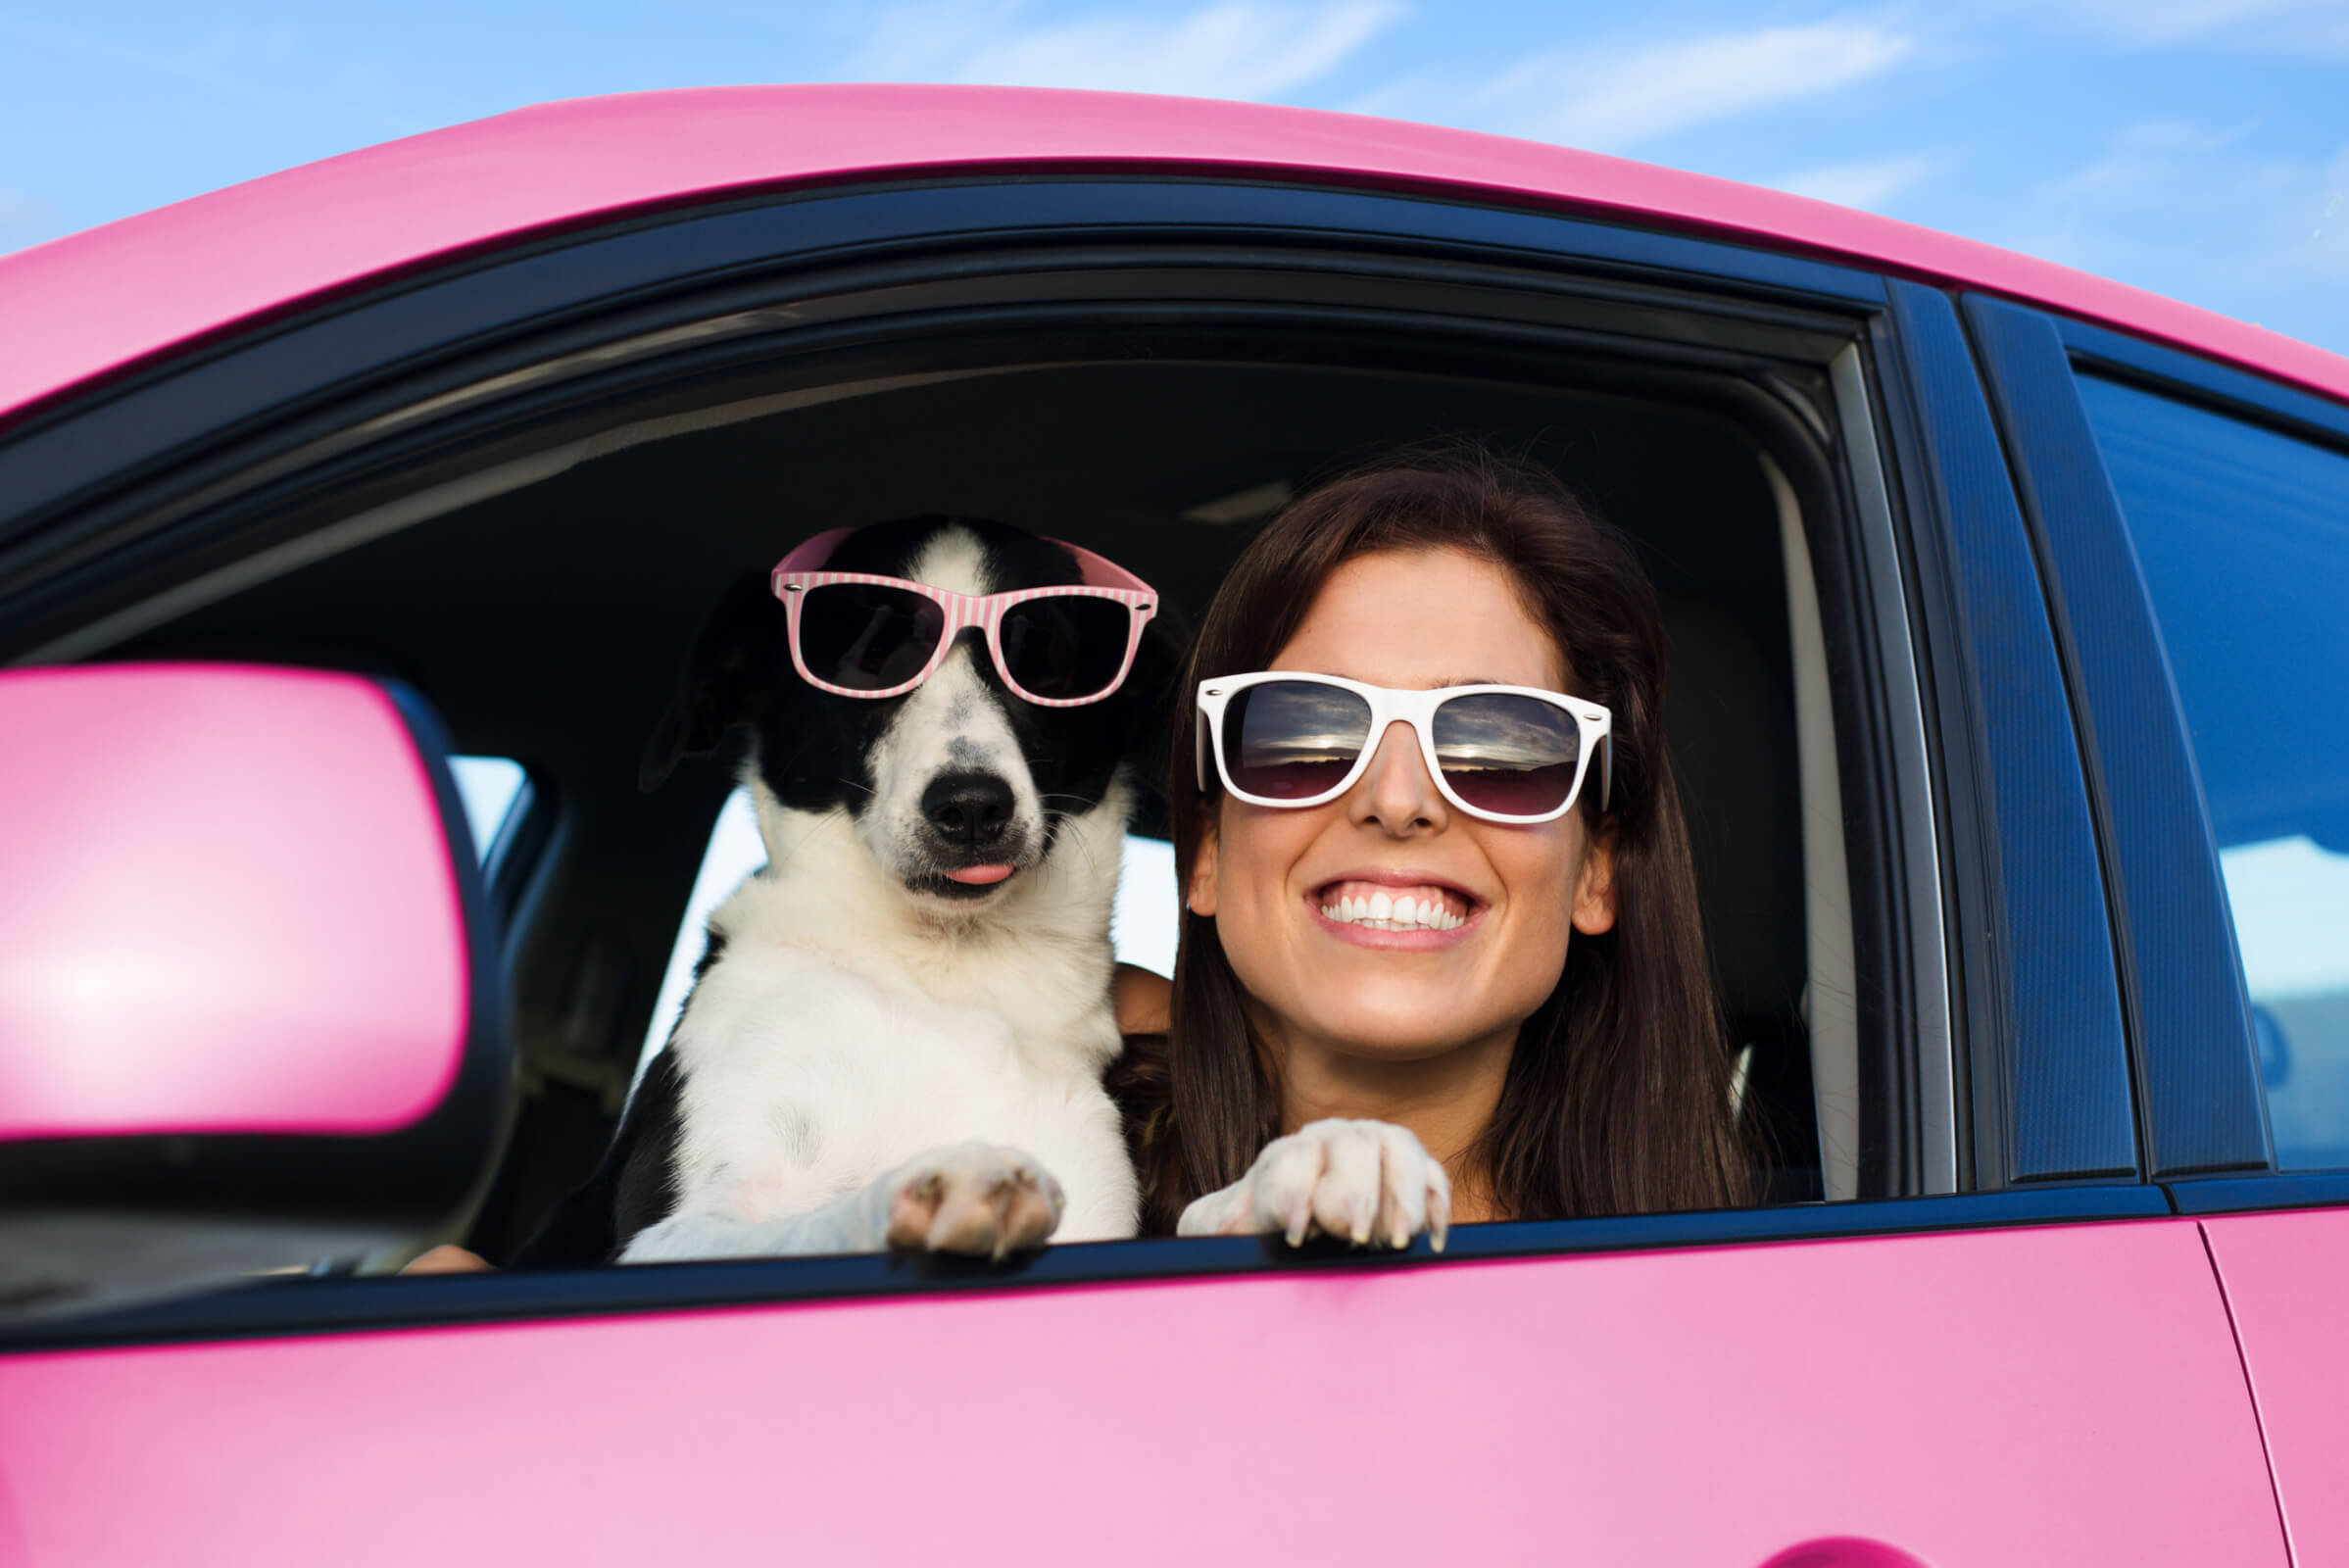 a Border Collie and a smiling woman in sunglasses sitting in a pink car